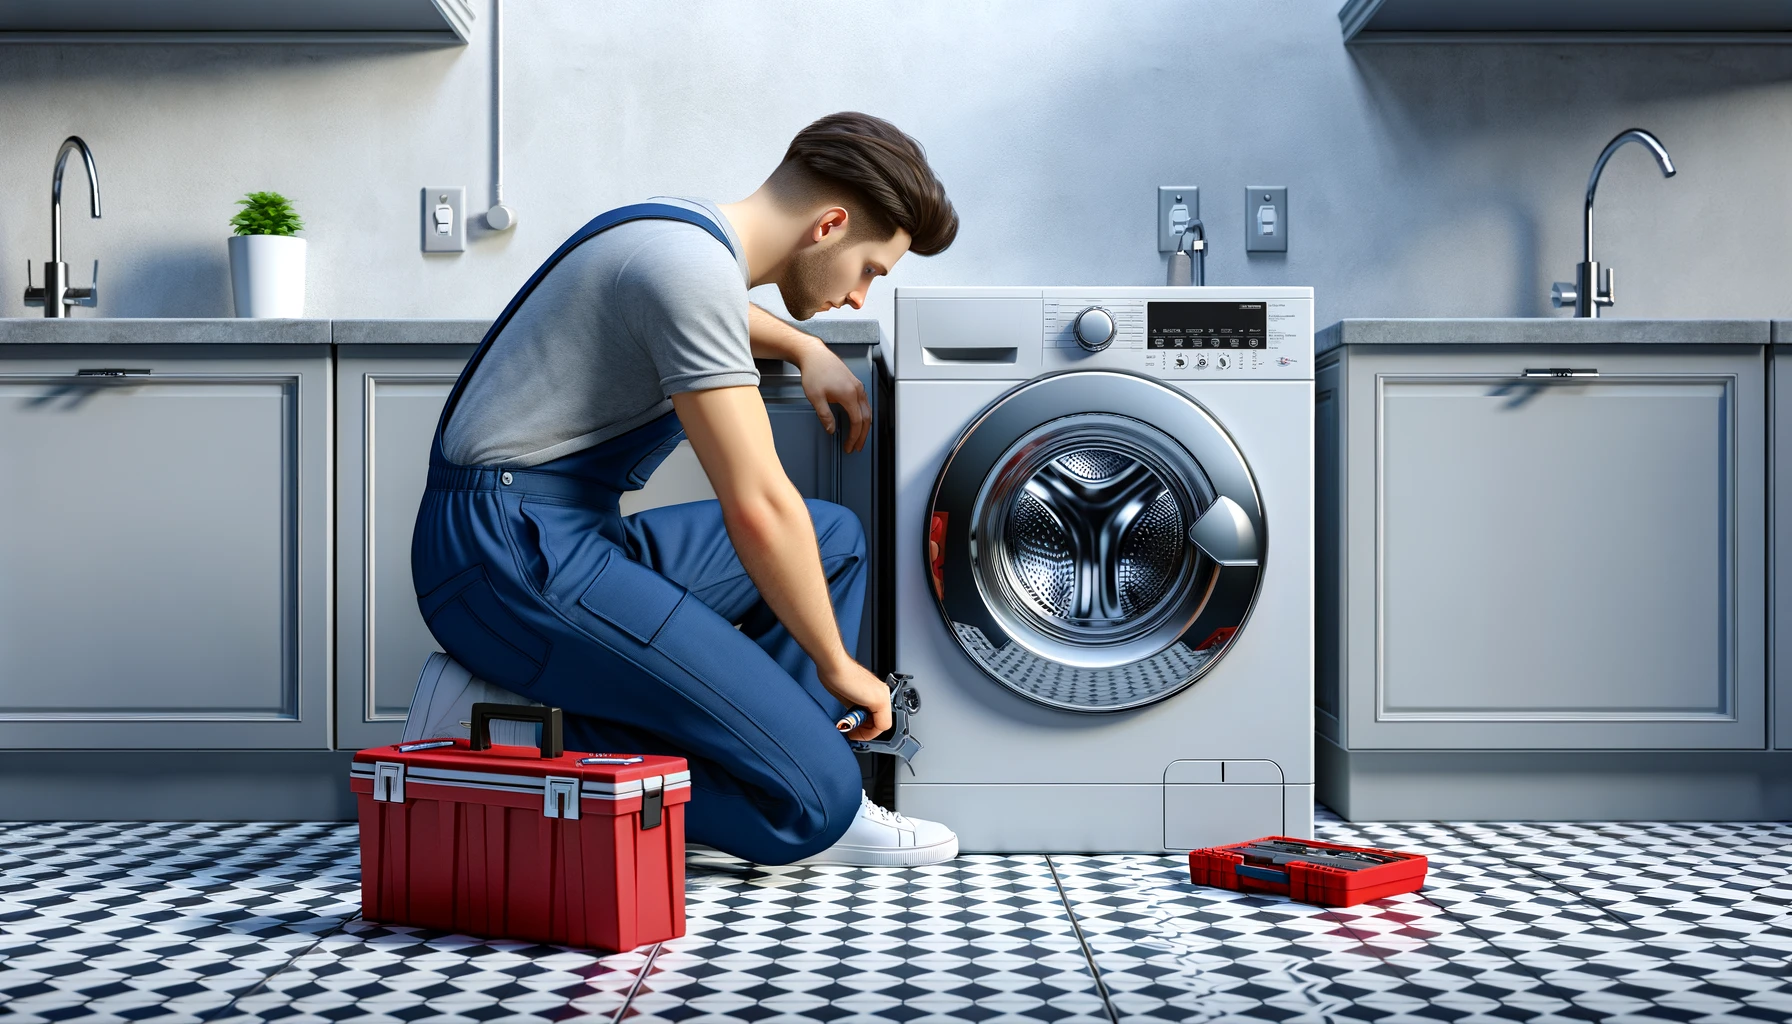 The Most Common Appliance Safety Mistakes Homeowners Make